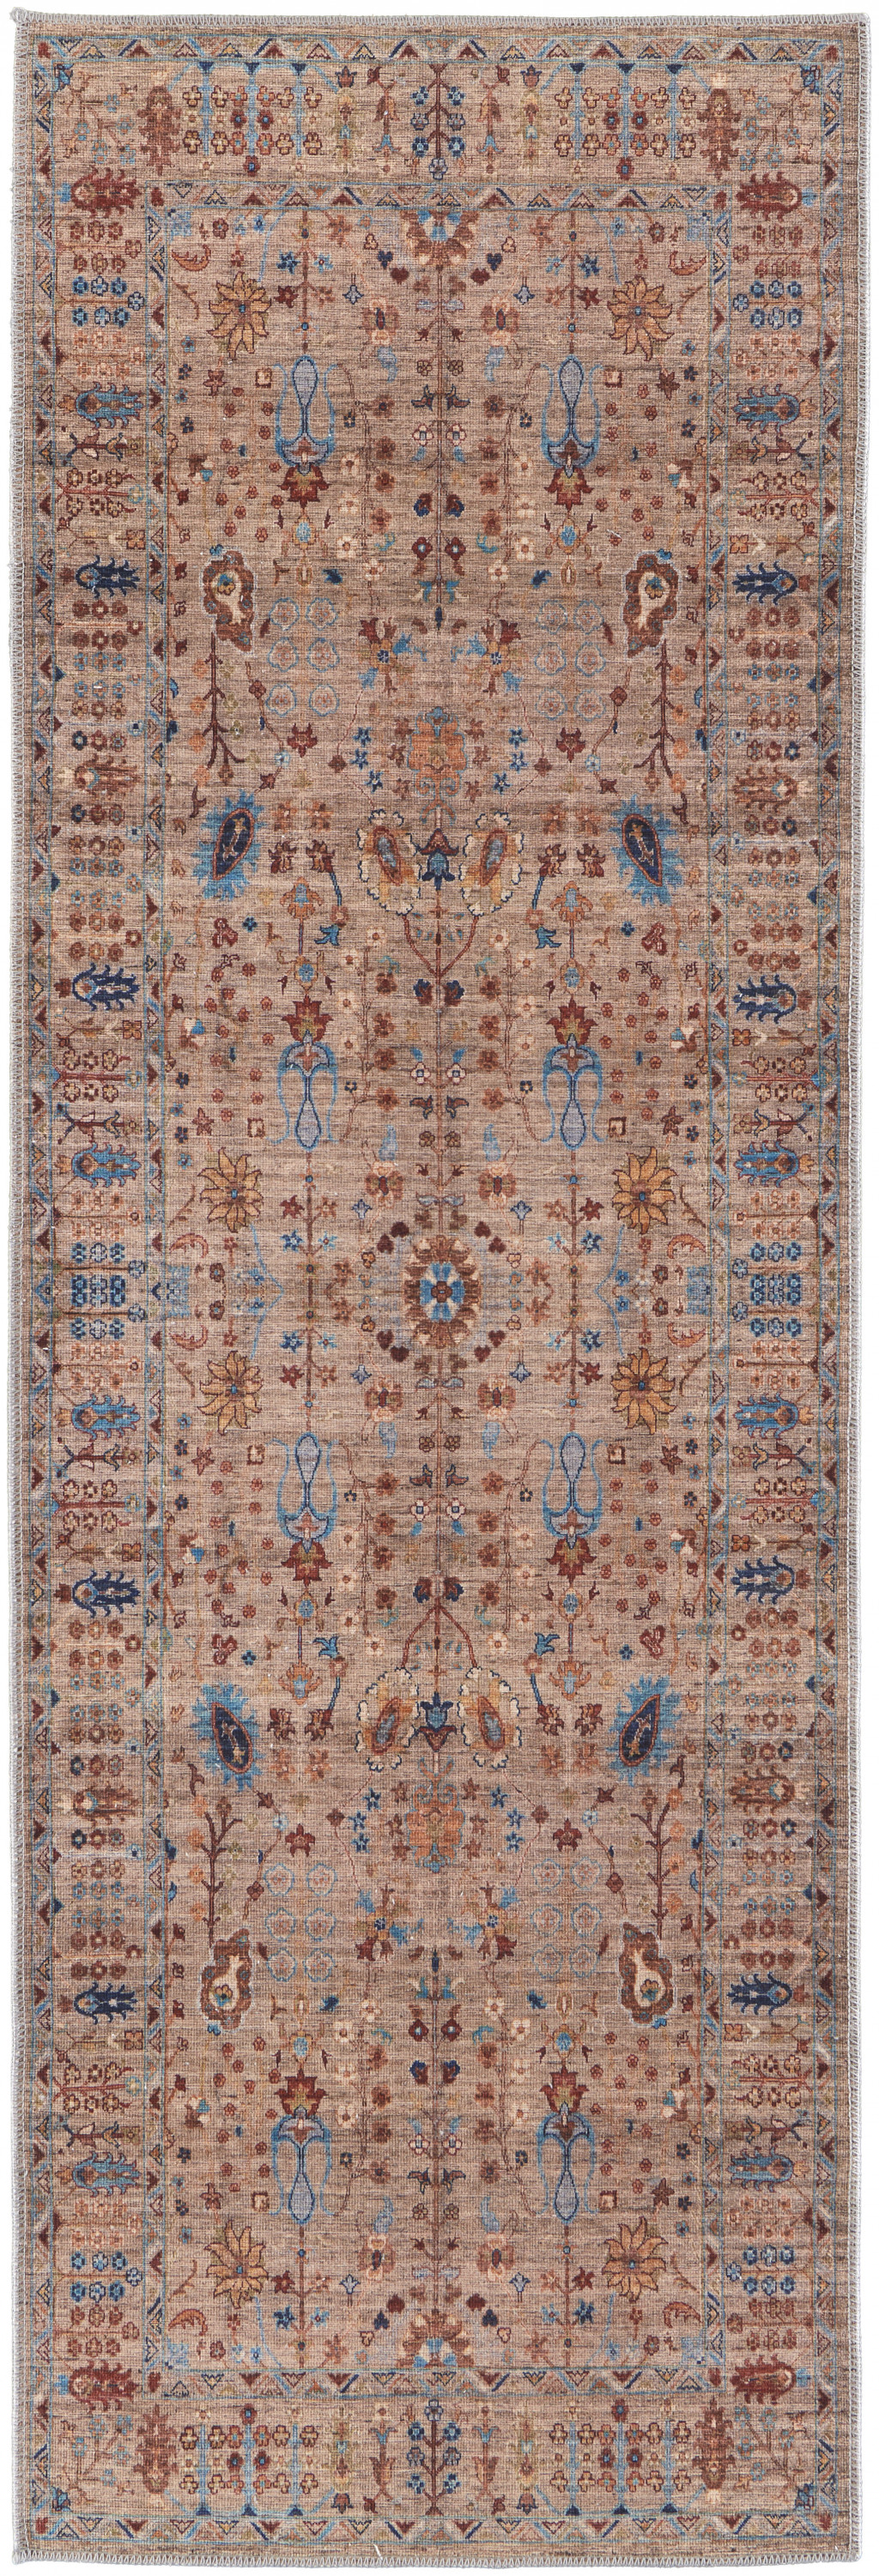 8' Tan Pink And Blue Floral Power Loom Runner Rug-515166-1